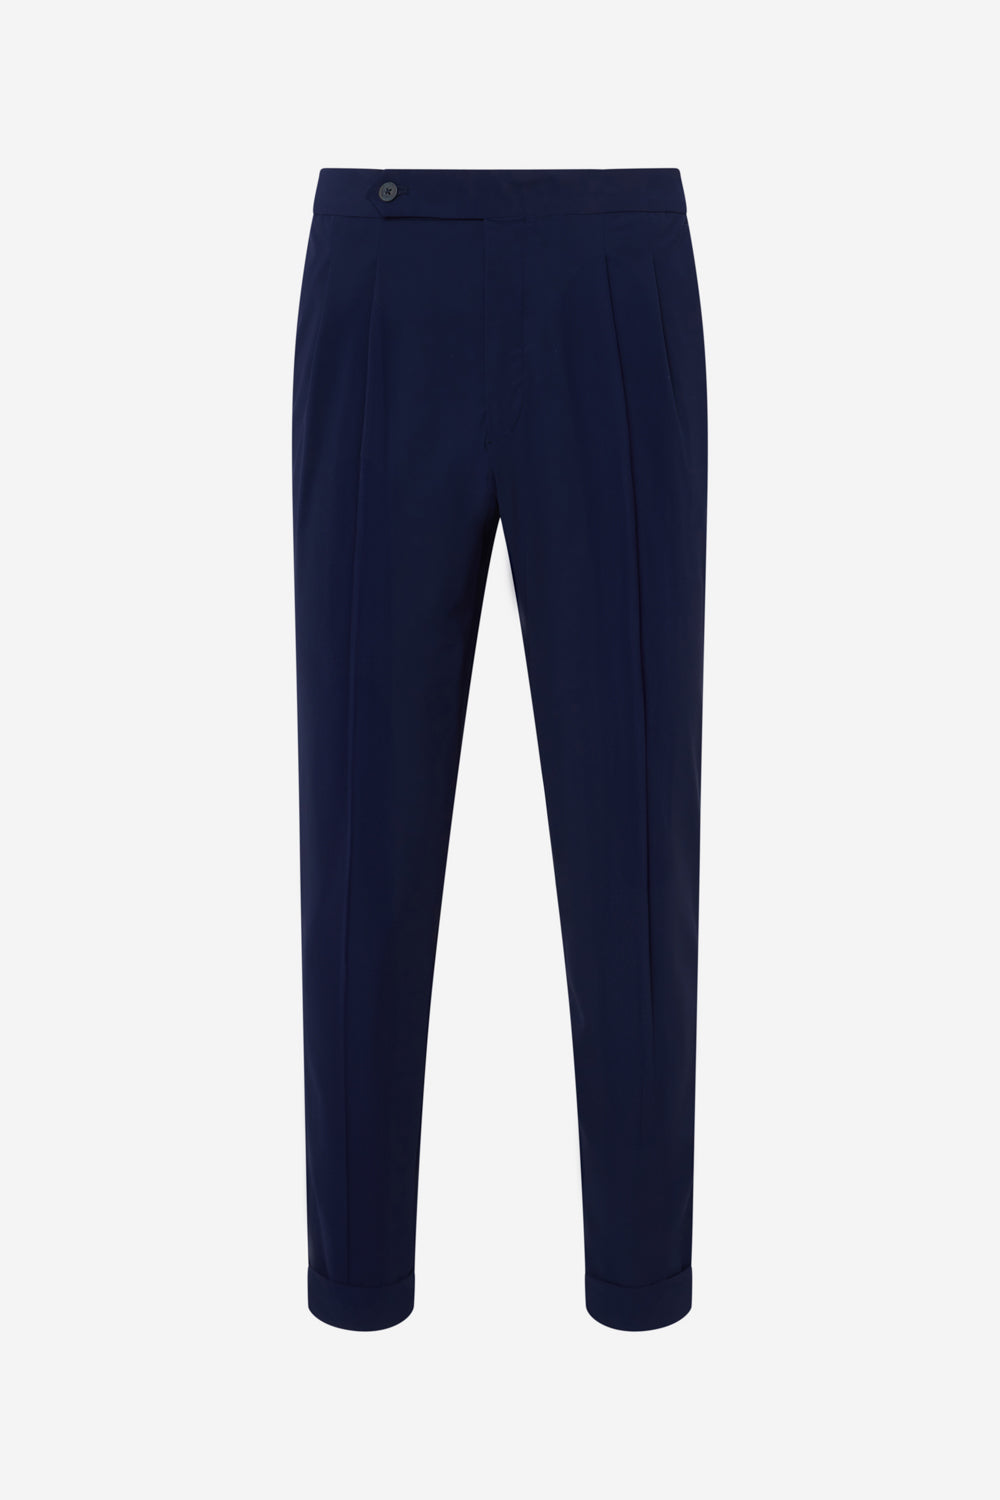 DEEP NAVY LOSSI TROUSERS